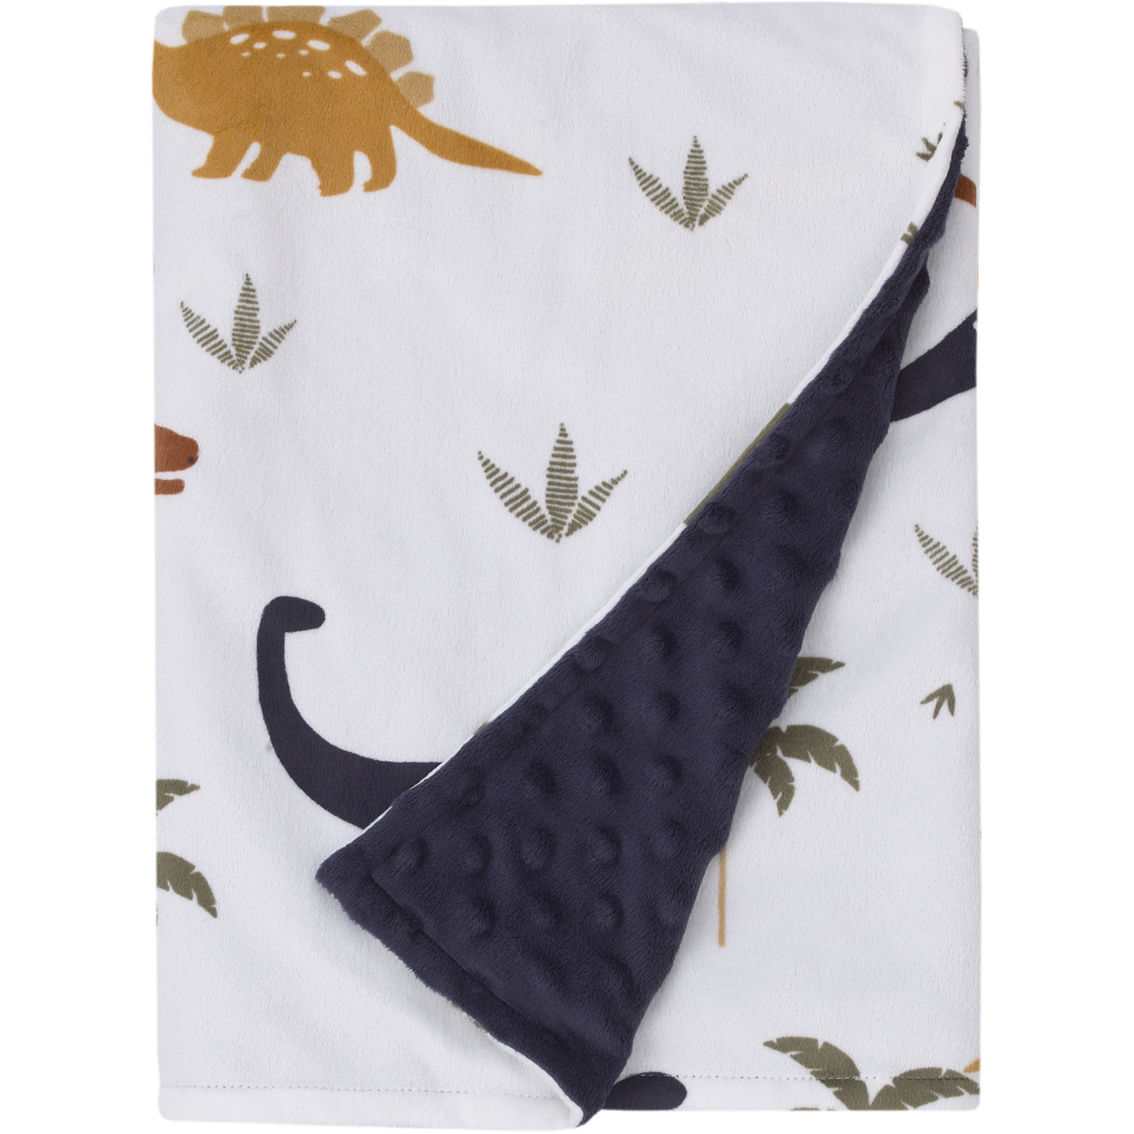 Little Bedding by NoJo Dino Plush Blanket - Image 3 of 4